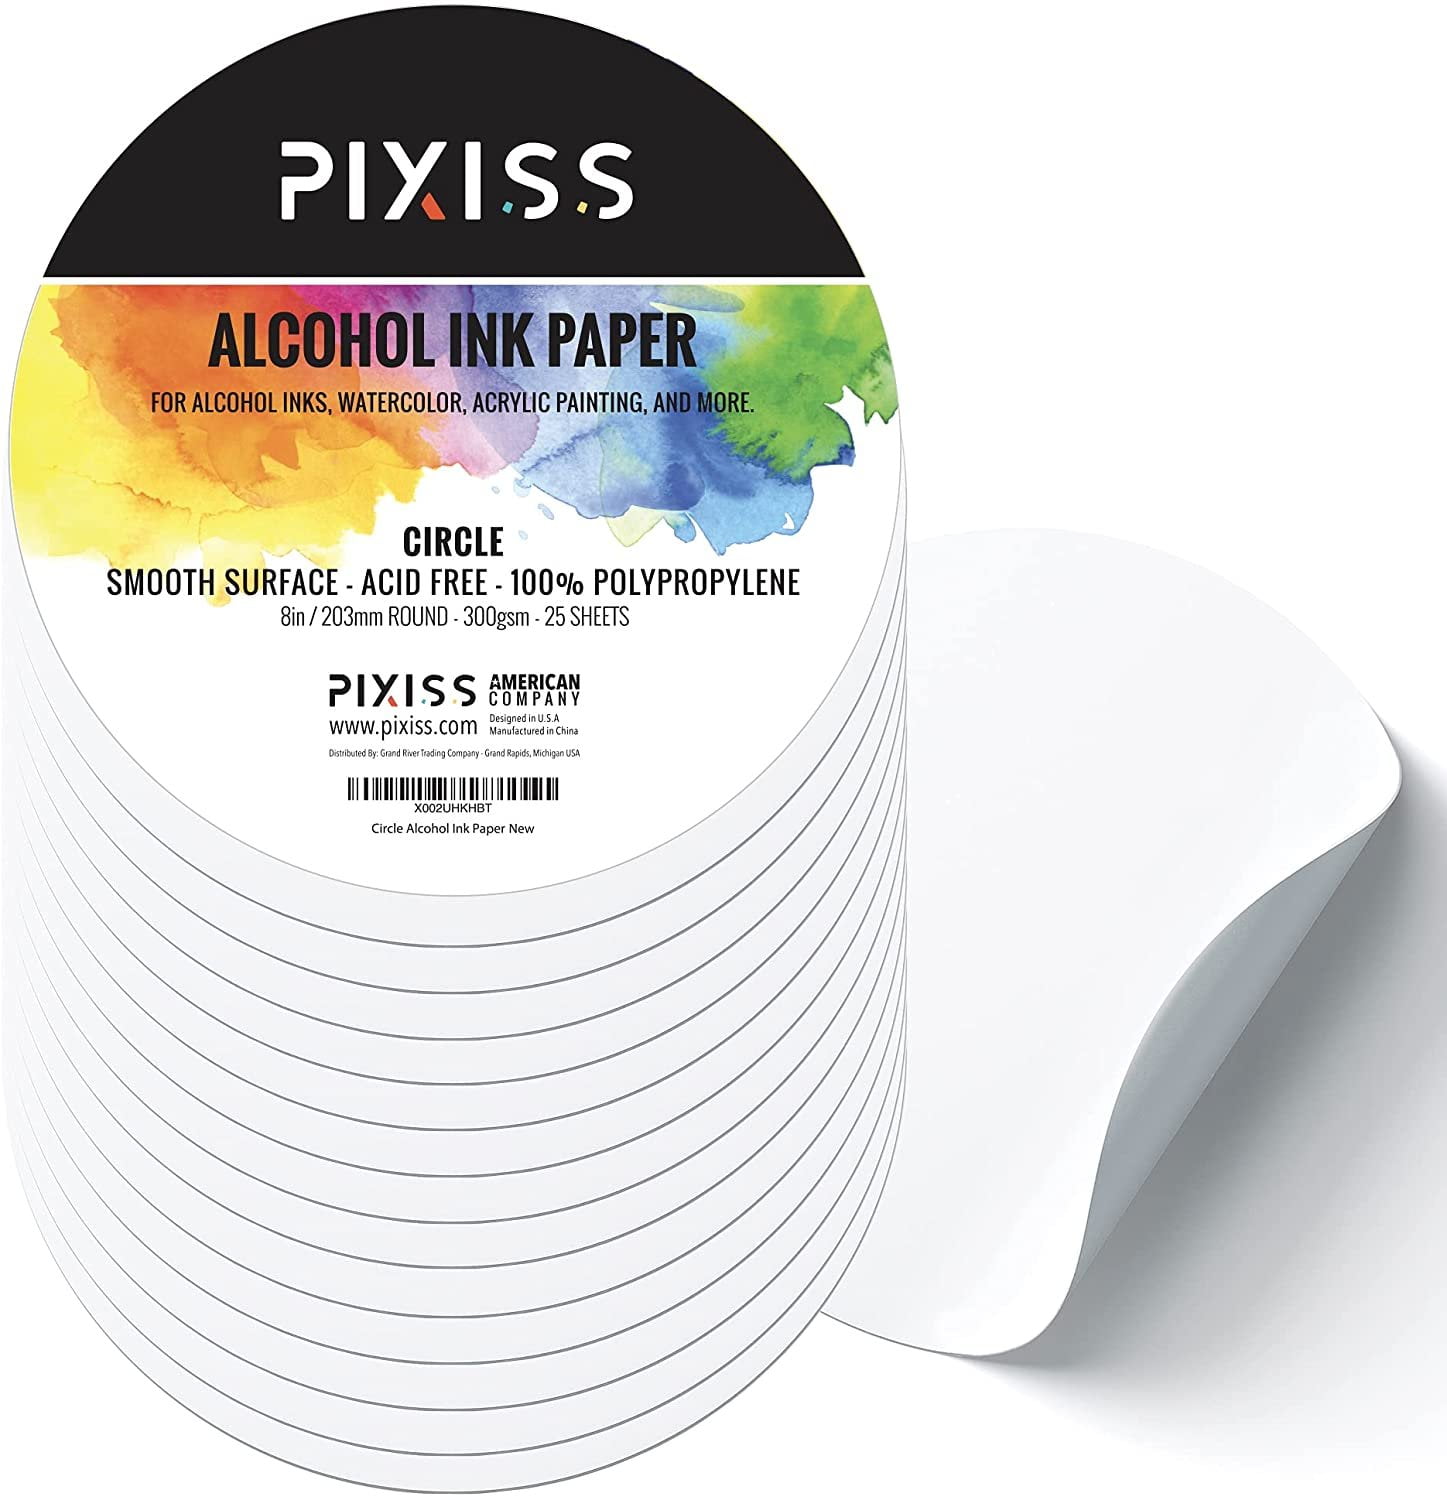 Alcohol Ink Paper for Alcohol Ink Art Painting - 25 Sheets Heavy Circle  Round Art Paper for Alcohol Ink & Watercolor Paper, Synthetic Paper 8  Inches 203mm, 300gsm Cardstock 